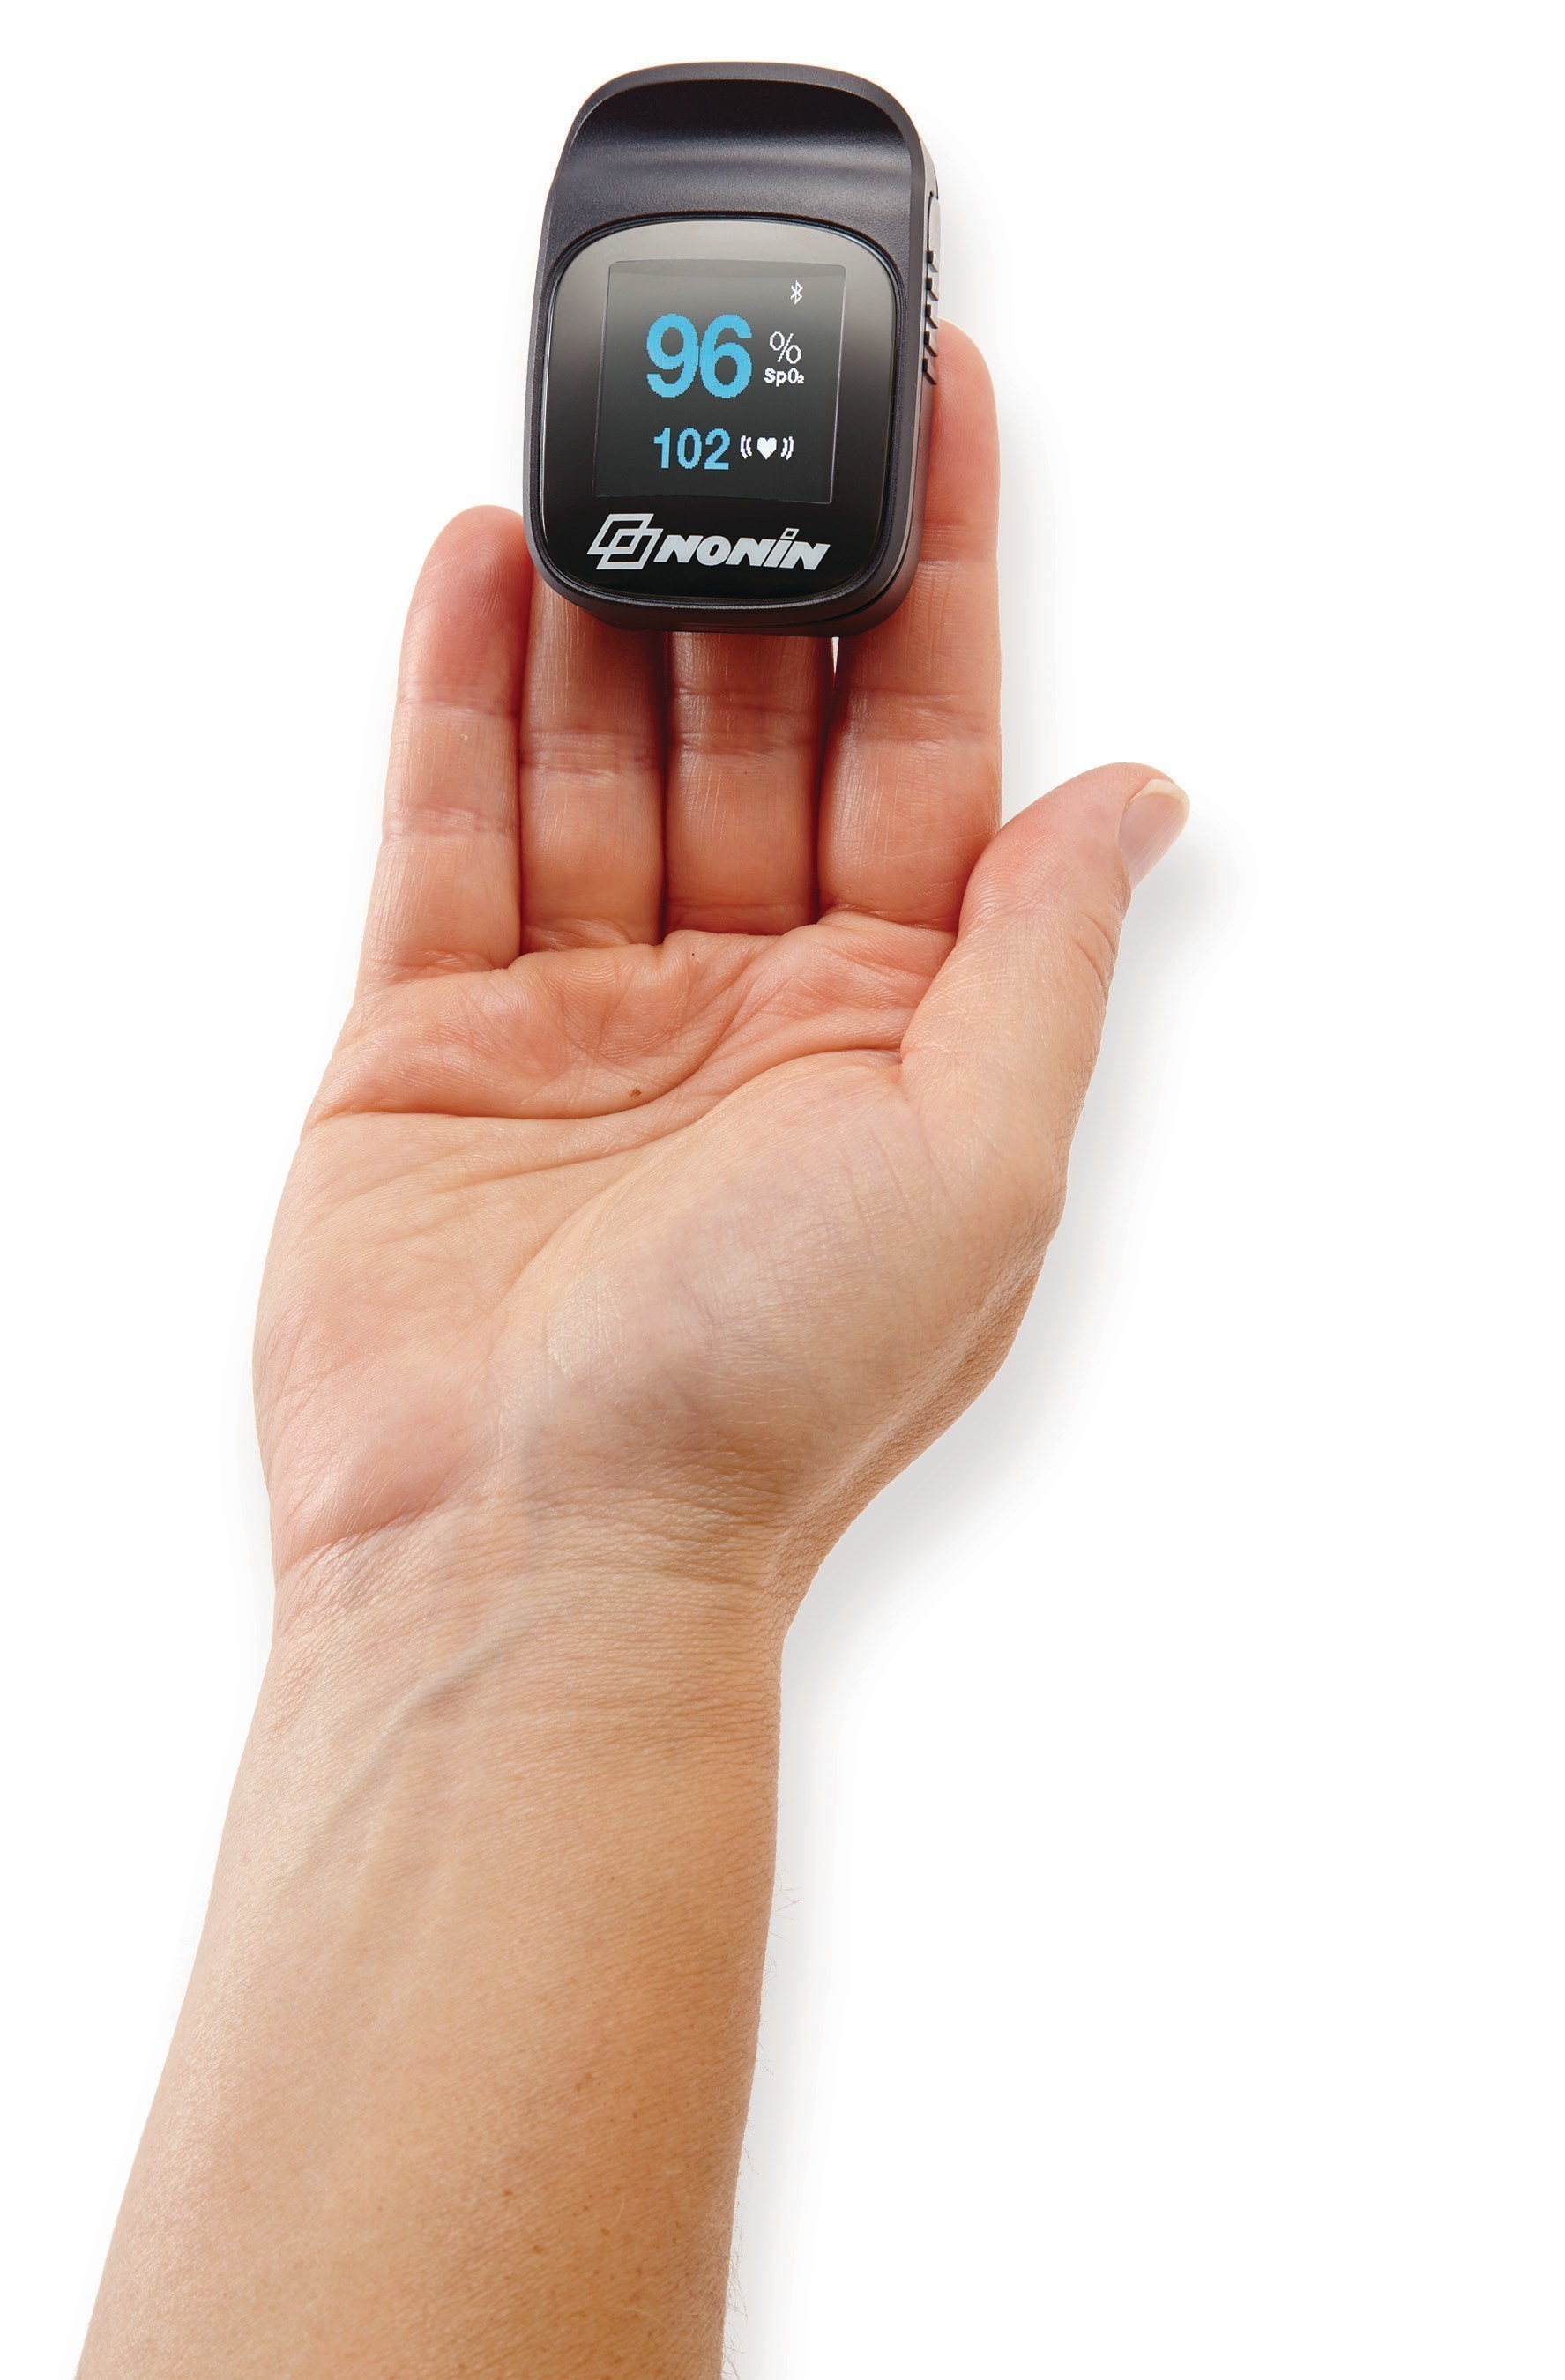 Nonin's Model 3230, the first finger pulse oximeter with Bluetooth Smart wireless technology, is a high-performing OEM pulse oximeter that provides a solution for SpO2 and pulse rate spot-check monitoring for OEM systems like the IDEAL Life system.